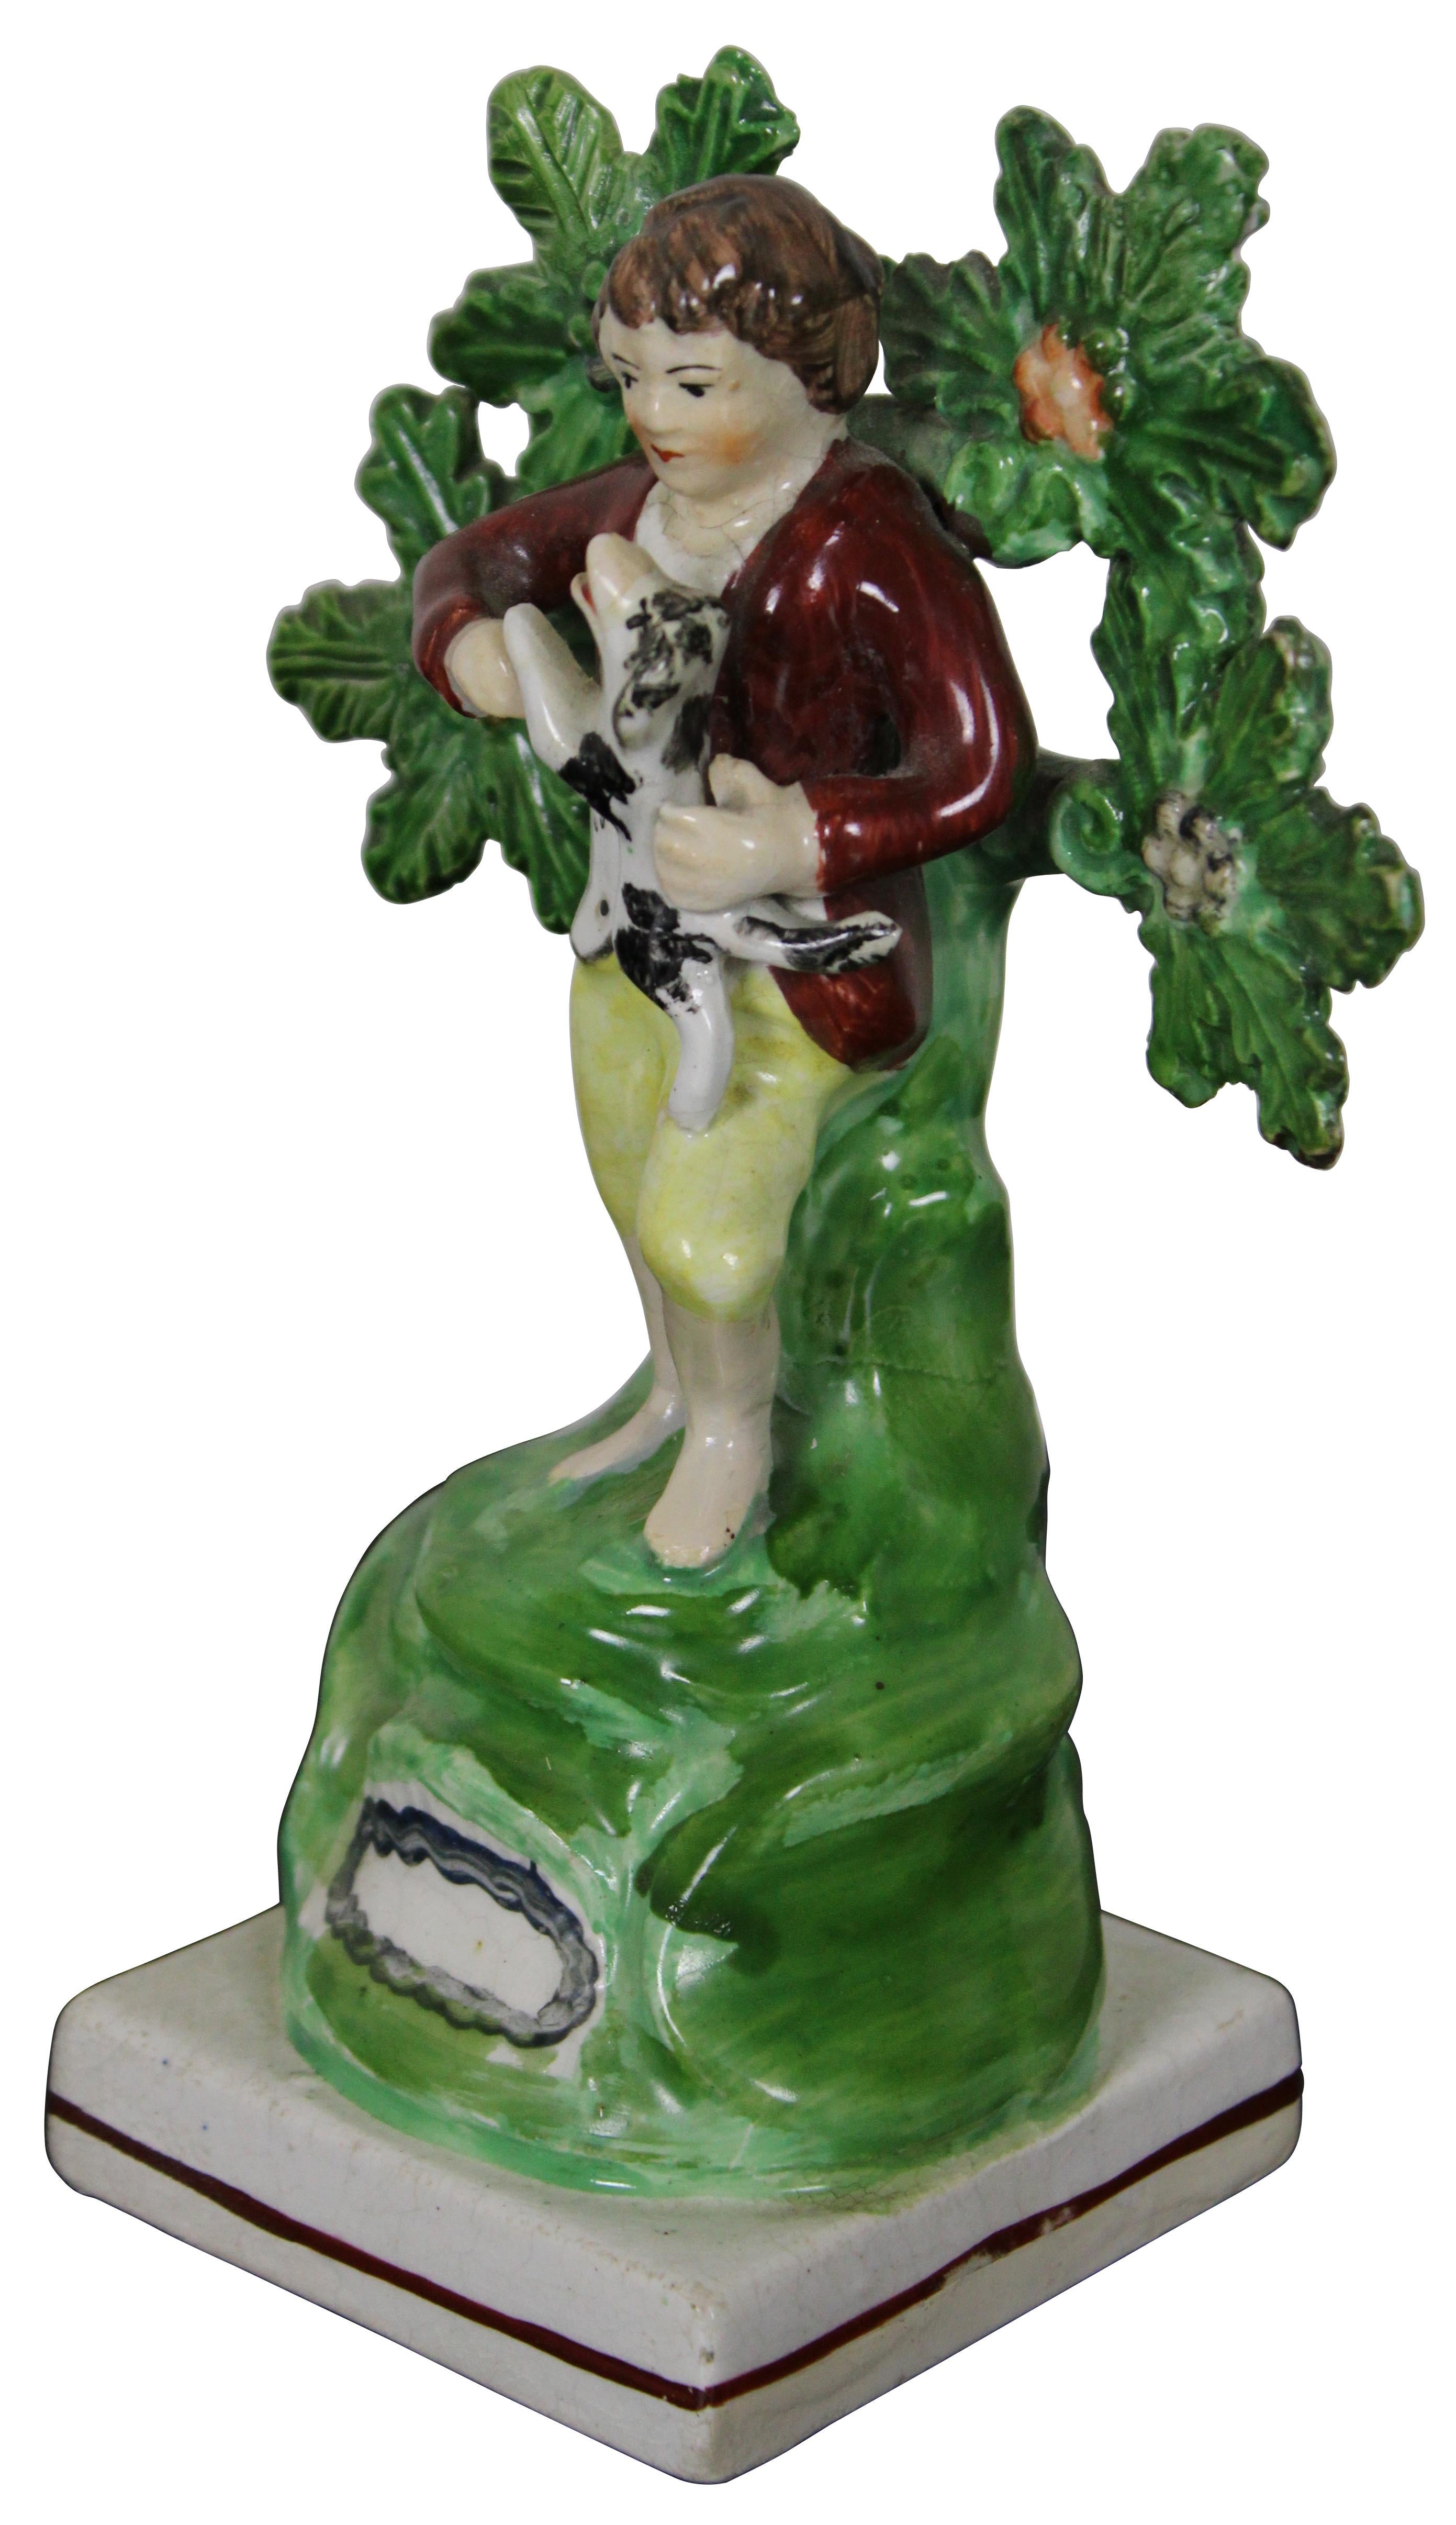 Antique Victorian Staffordshire pearlware Bocage porcelain figurine in the shape of a young boy standing in front of a tree or shrub, holding a small dog. Measure: 5.5